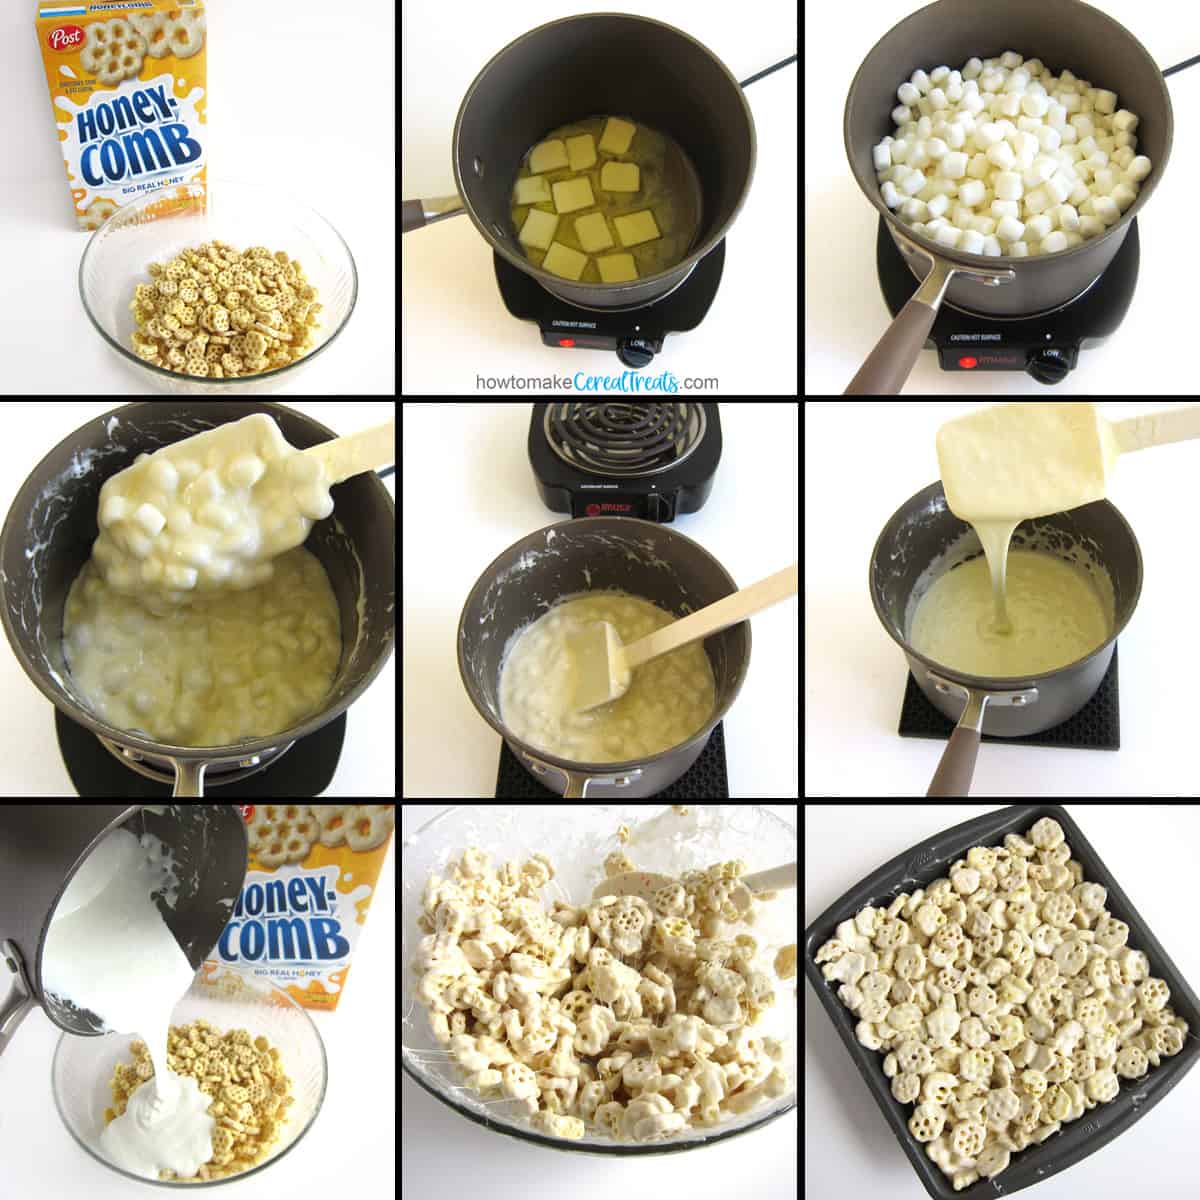 melt butter and marshmallows, mix with Honeycomb Cereal, spread into a pan to make Honeycomb Cereal Treats